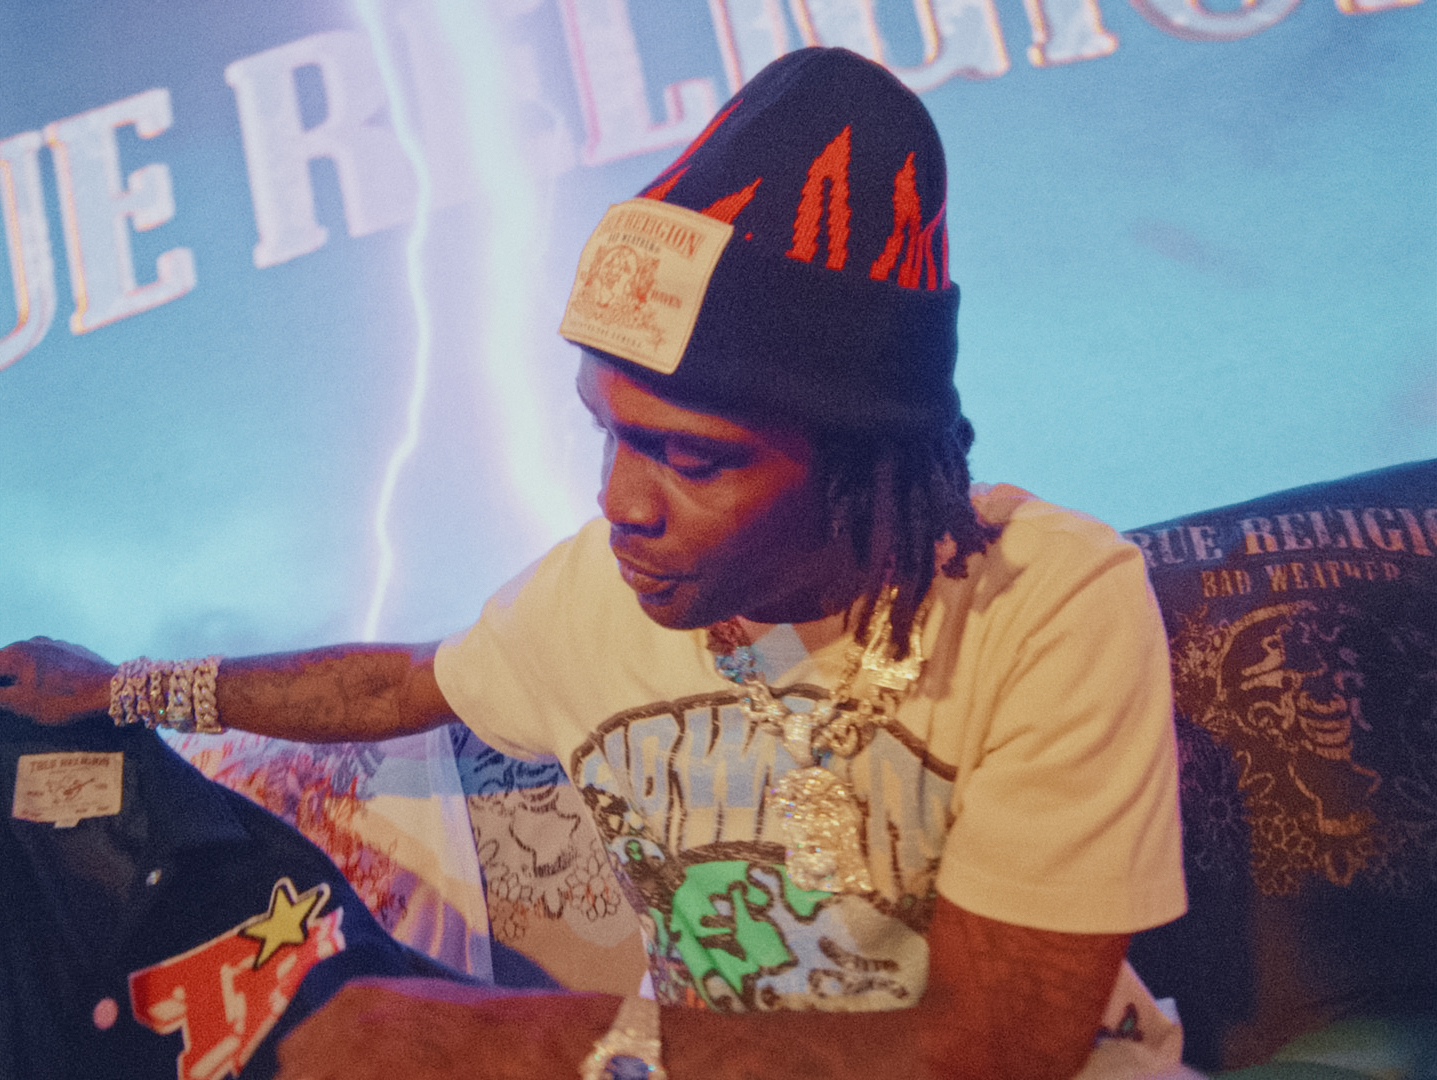 Man wearing a graphic t-shirt, black beanie, and multiple diamond chains, examining a jacket with patches, against a stylized background